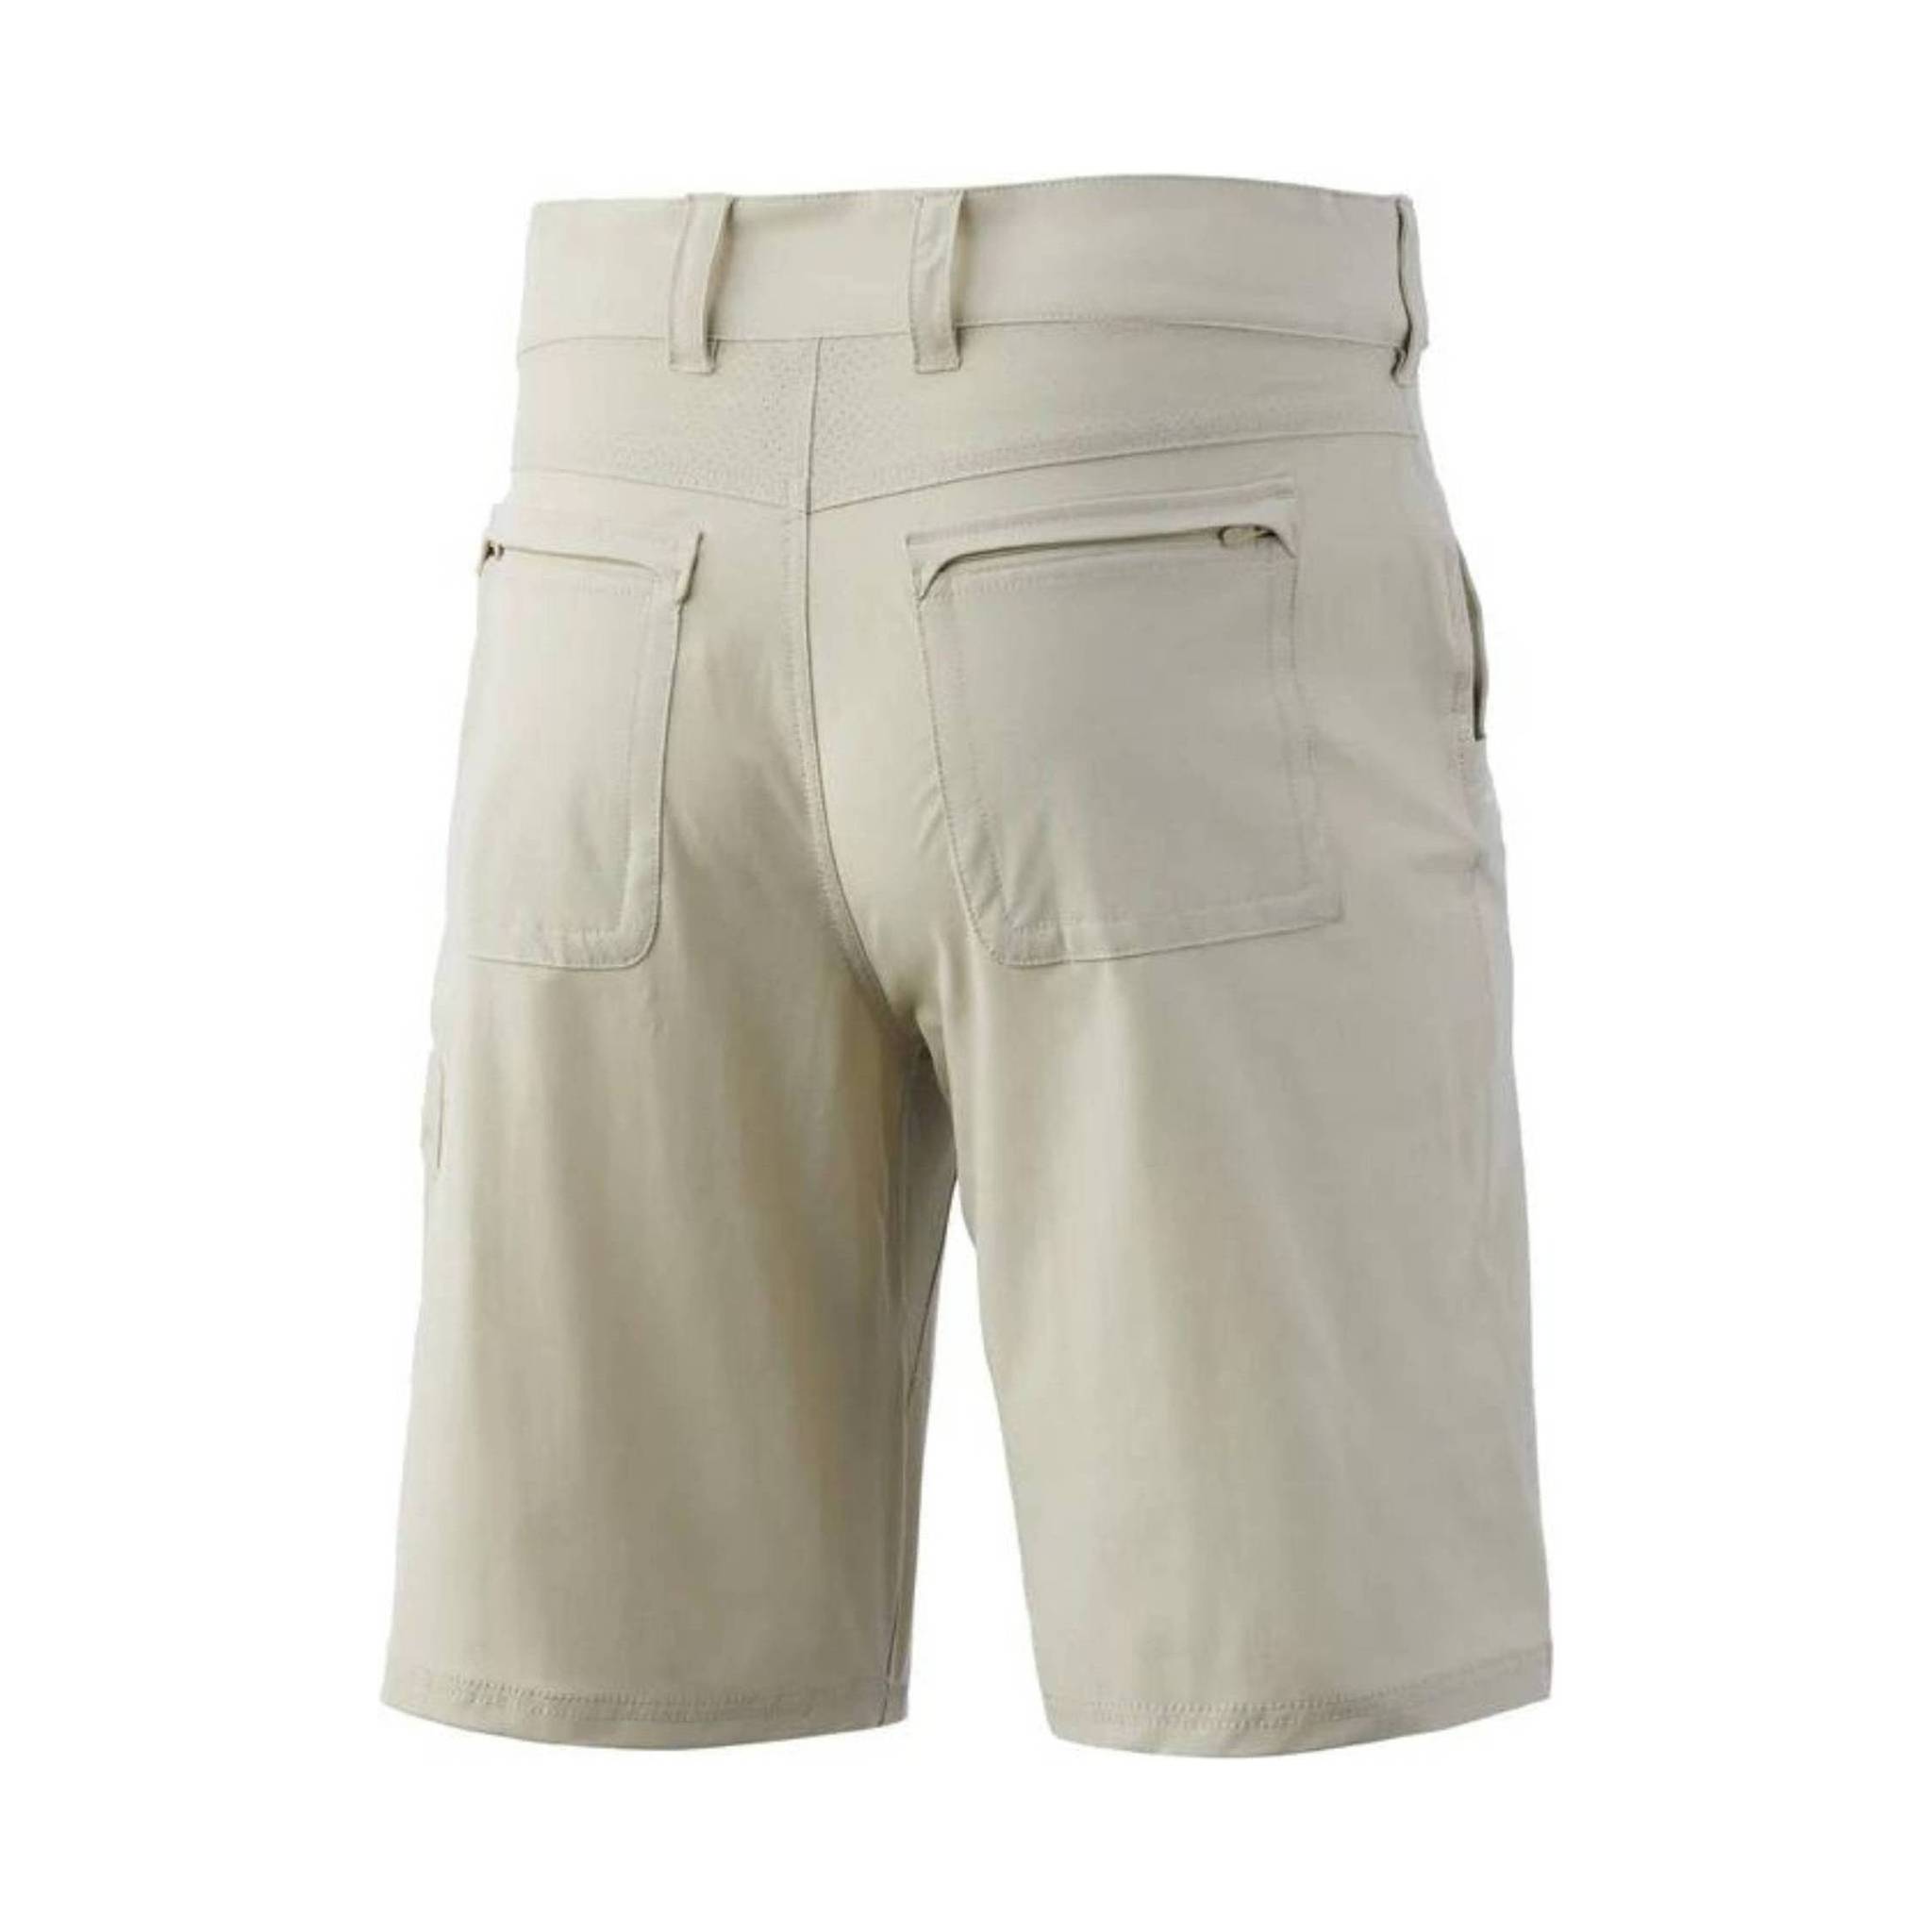 Men's Next Level Shorts by Huk Khaki | Clothing, Shoes & Accessories at West Marine